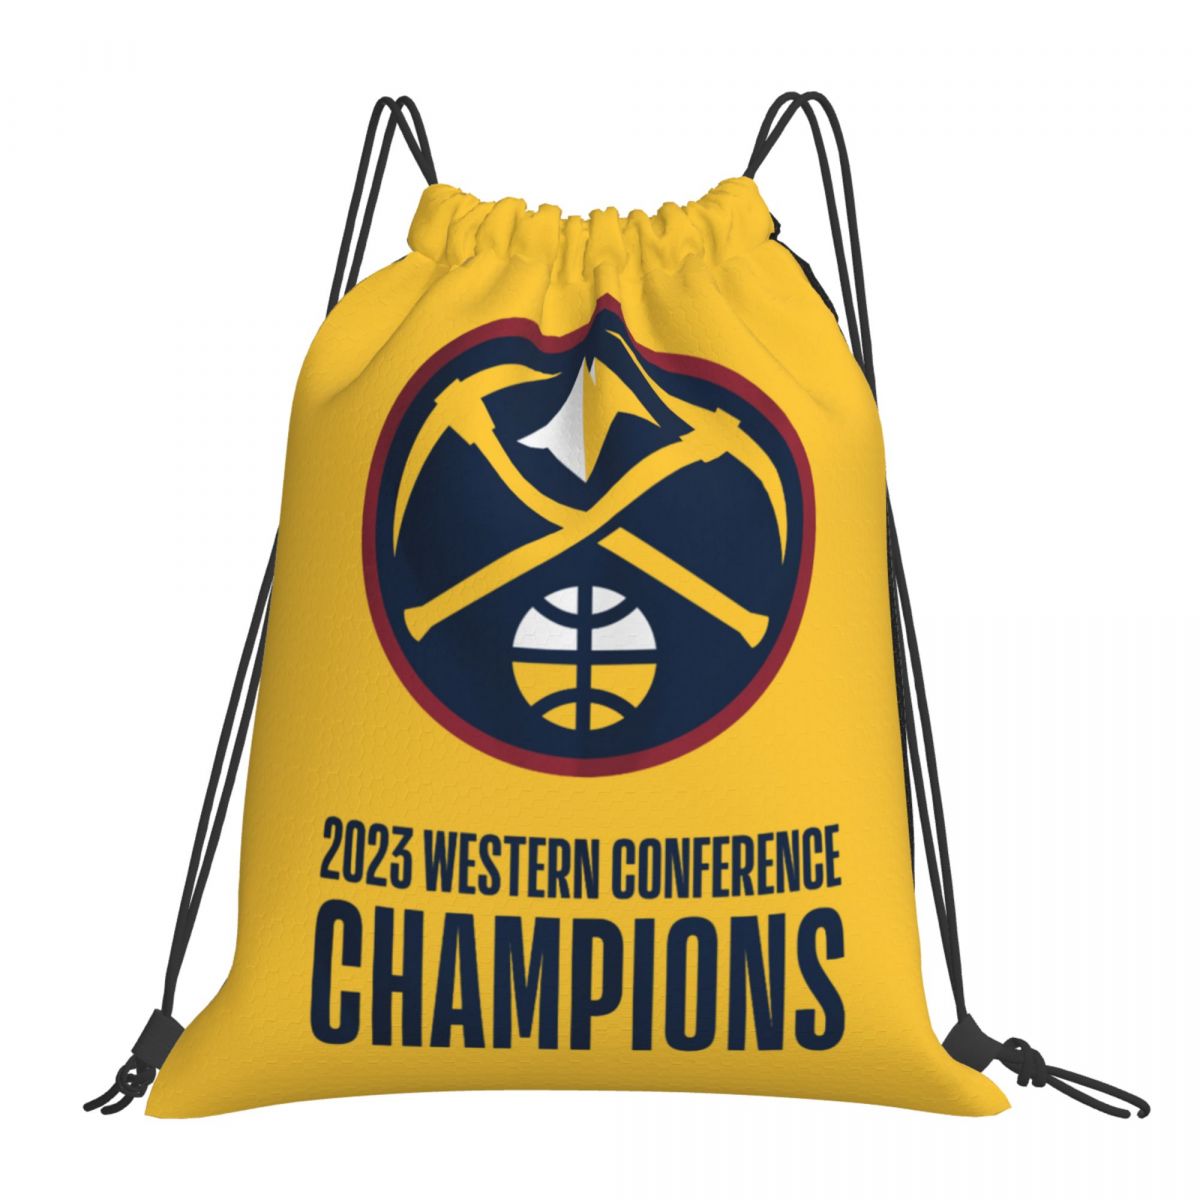 Denver Nuggets 2023 Western Conference Champions Drawstring Bags for School Gym